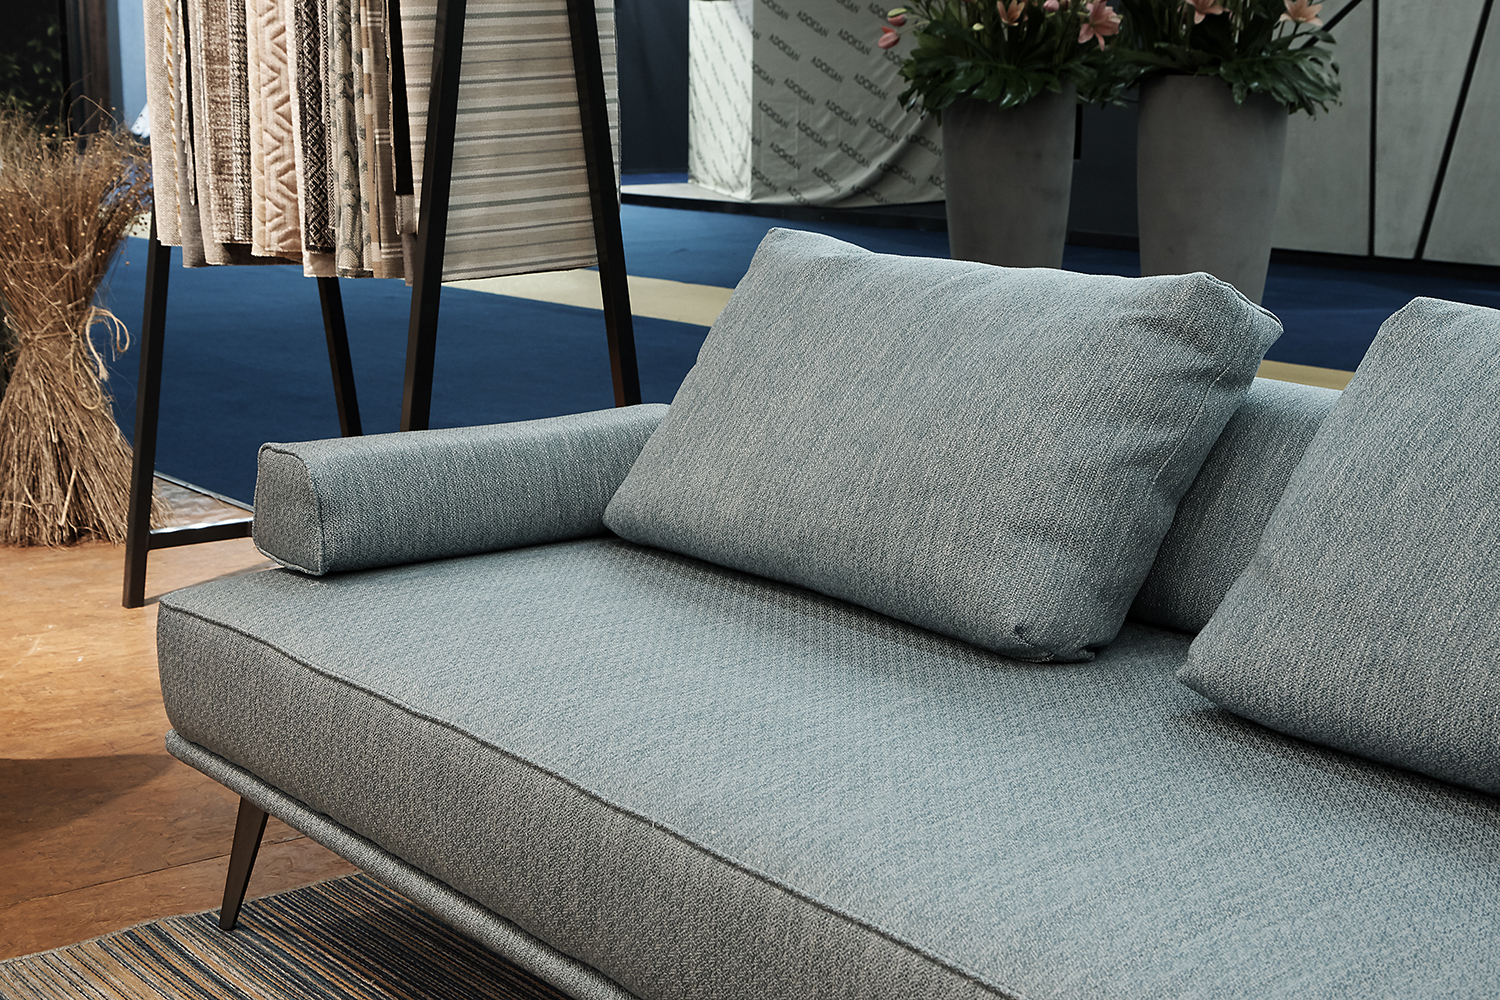 Gray couch with Vivalife fabric Kiwi at the Love Home Fabrics booth at Heimtextil 2020